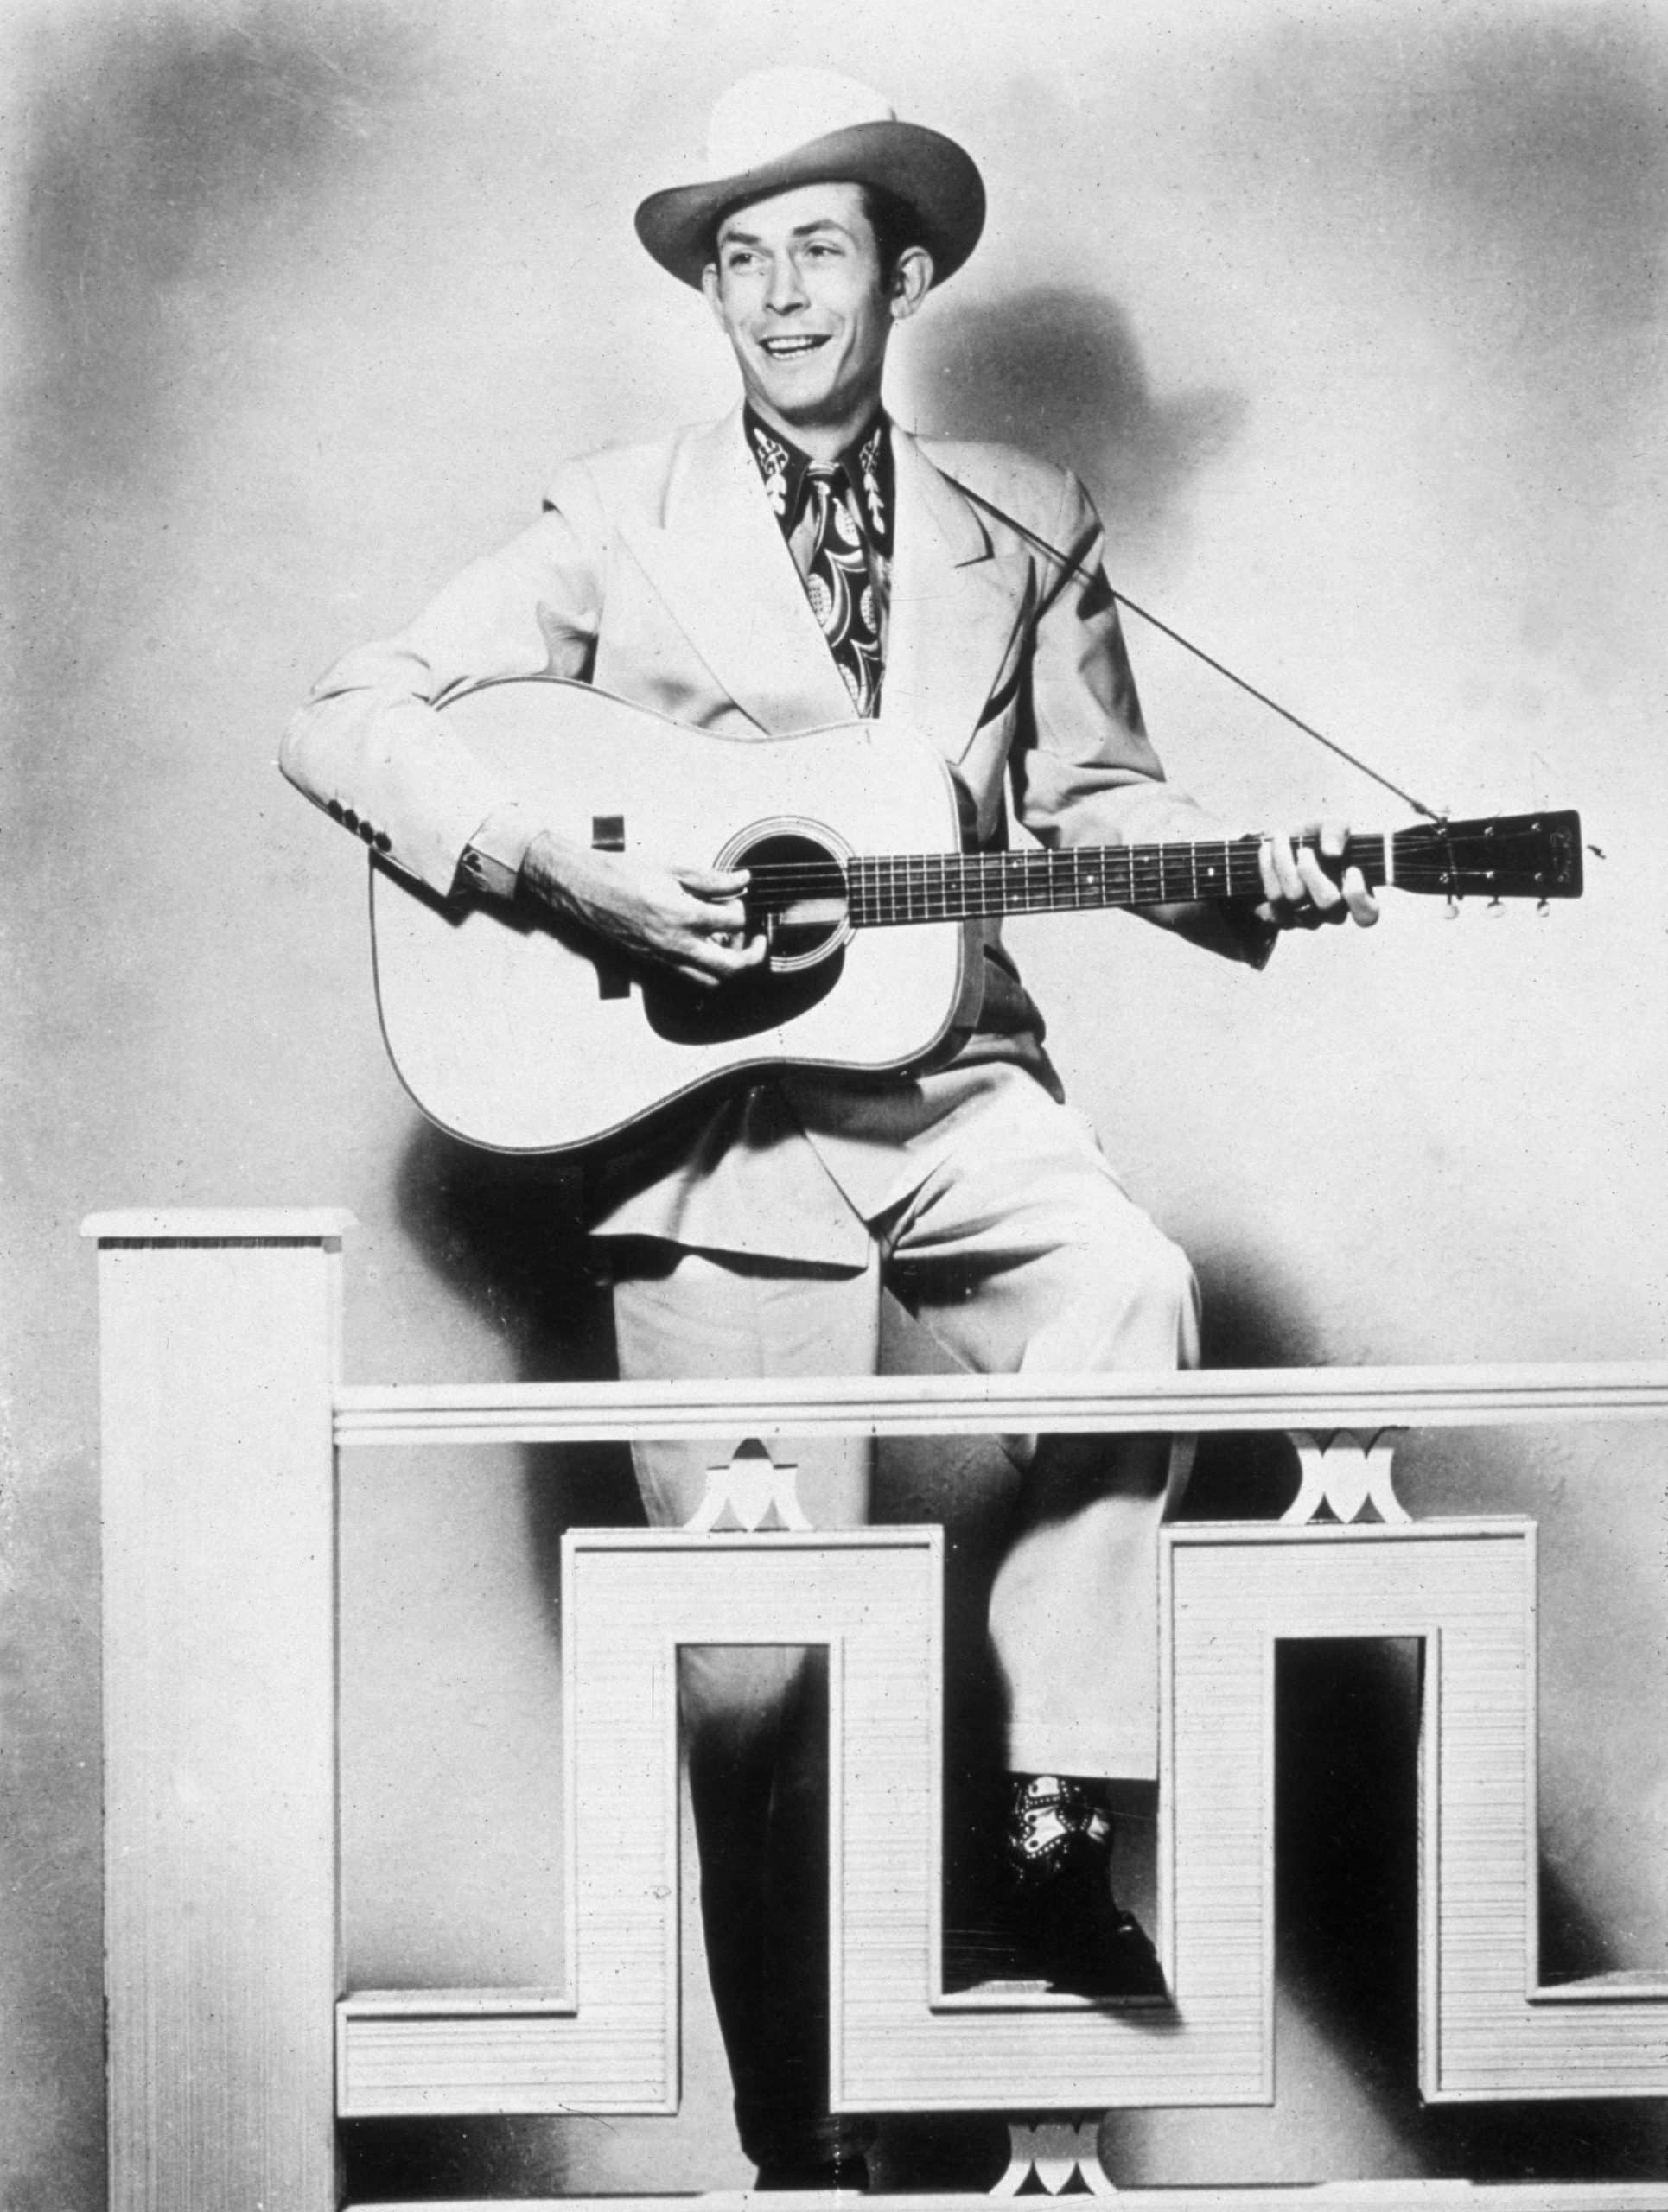 Country music legend Hank Williams is a member of the Rock & Roll Hall of Fame